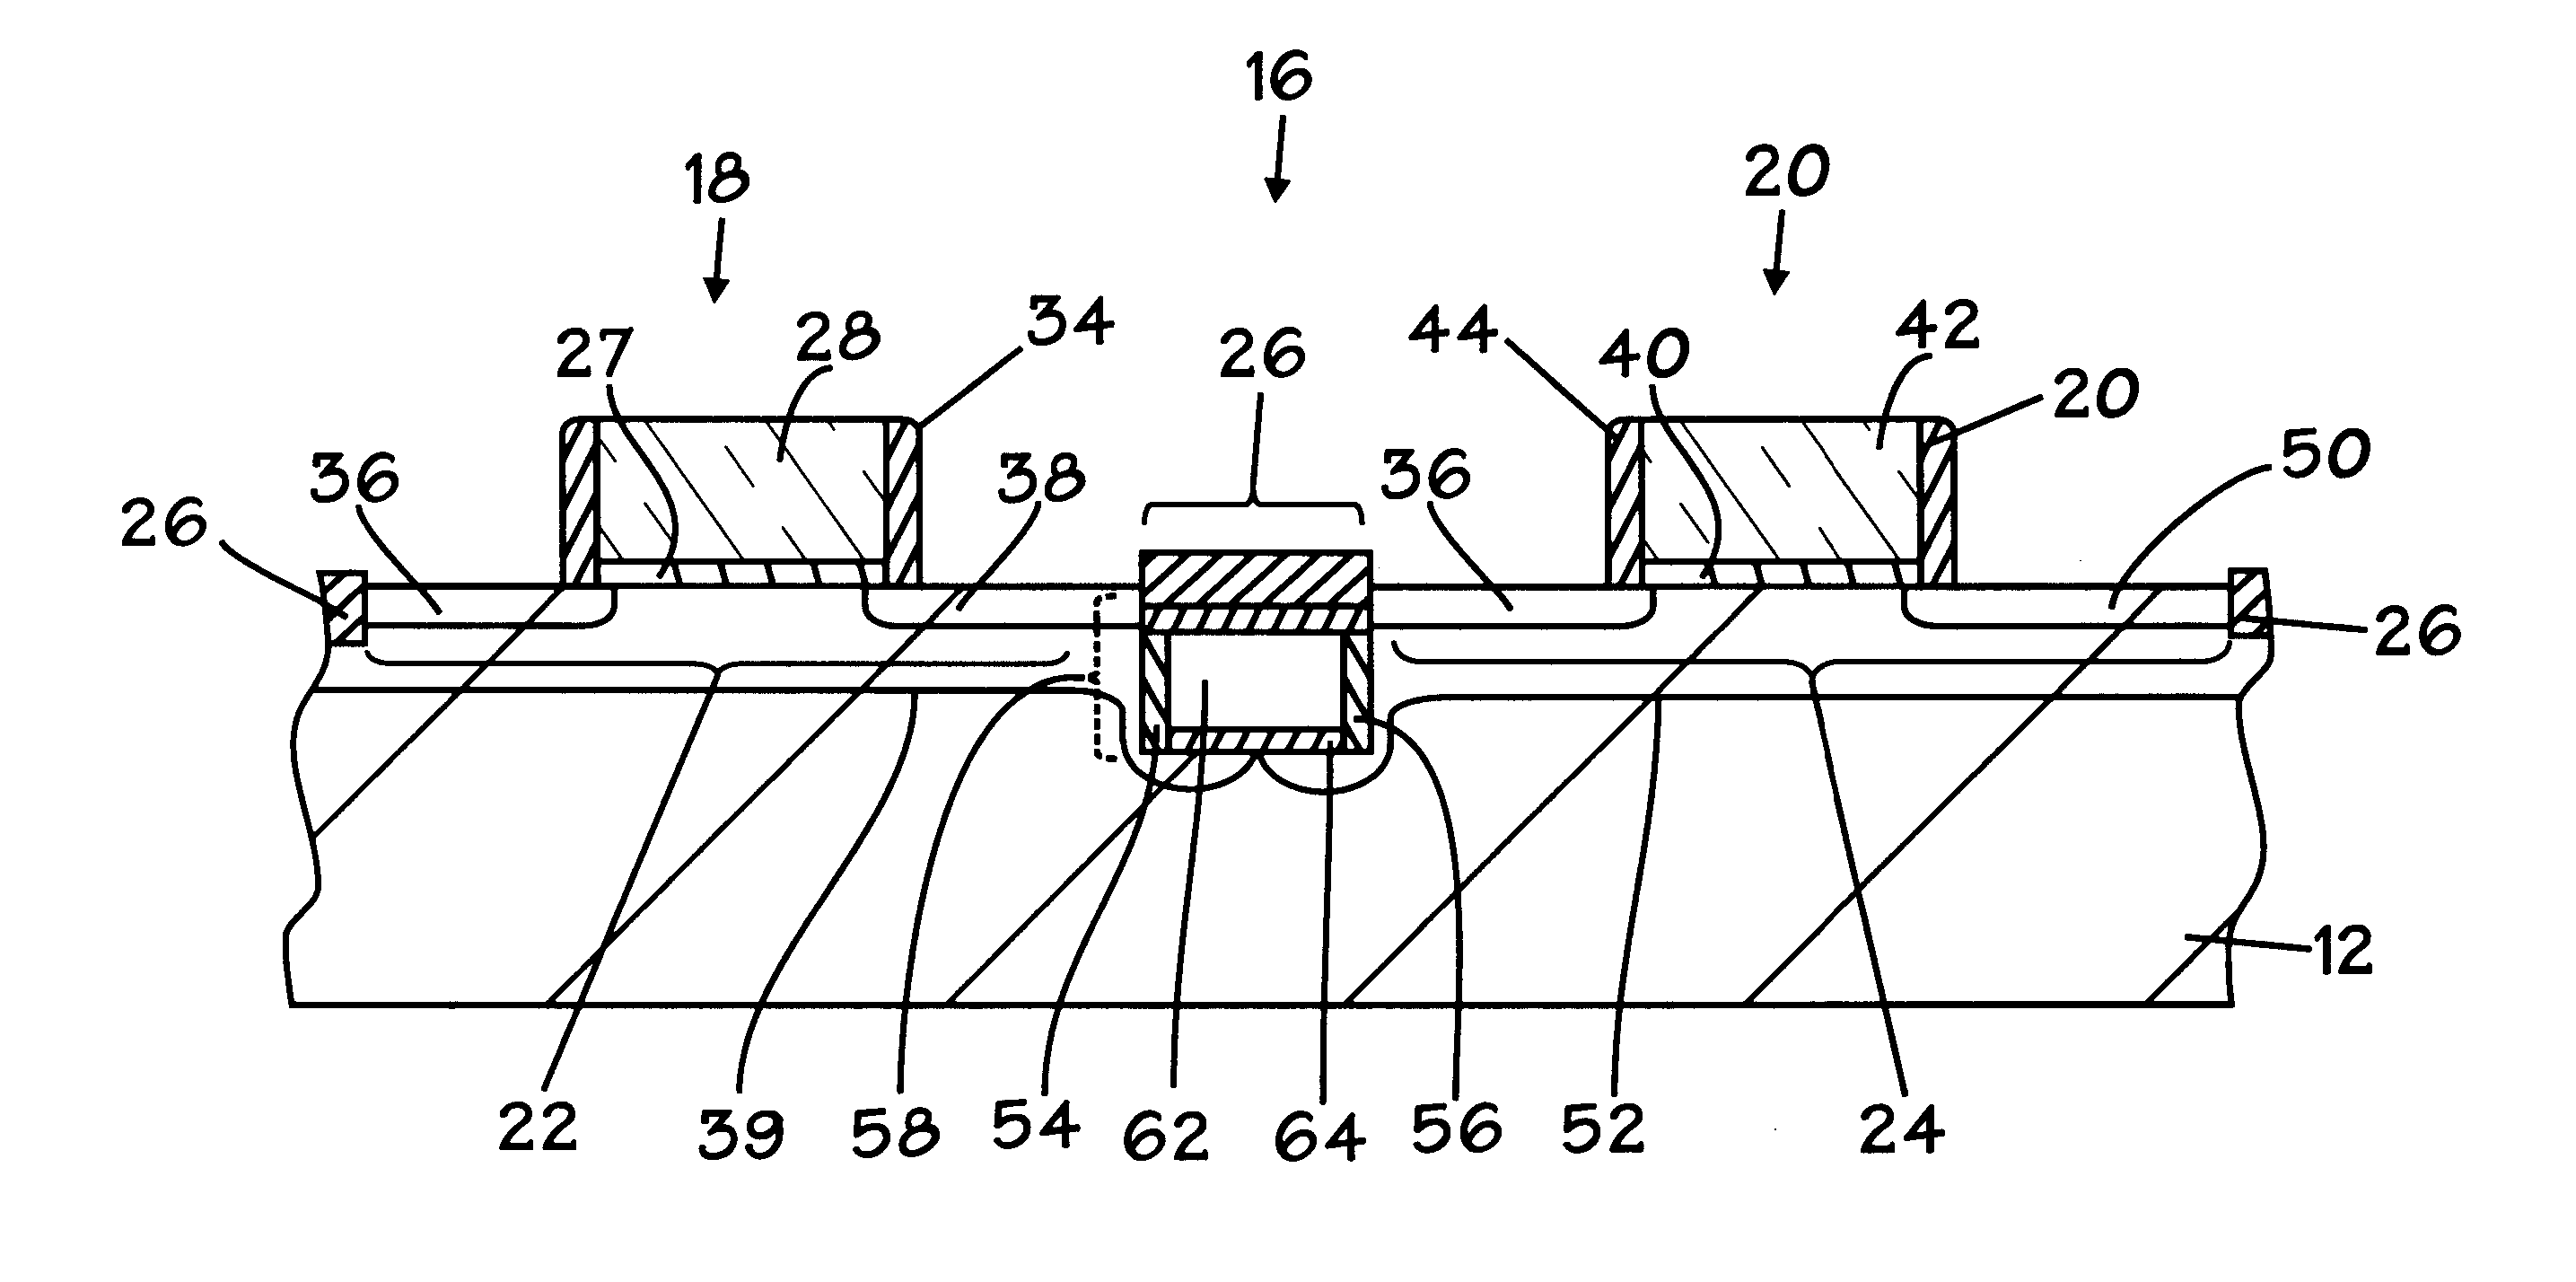 Method of making air gap isolation by making a lateral EPI bridge for low K isolation advanced CMOS fabrication